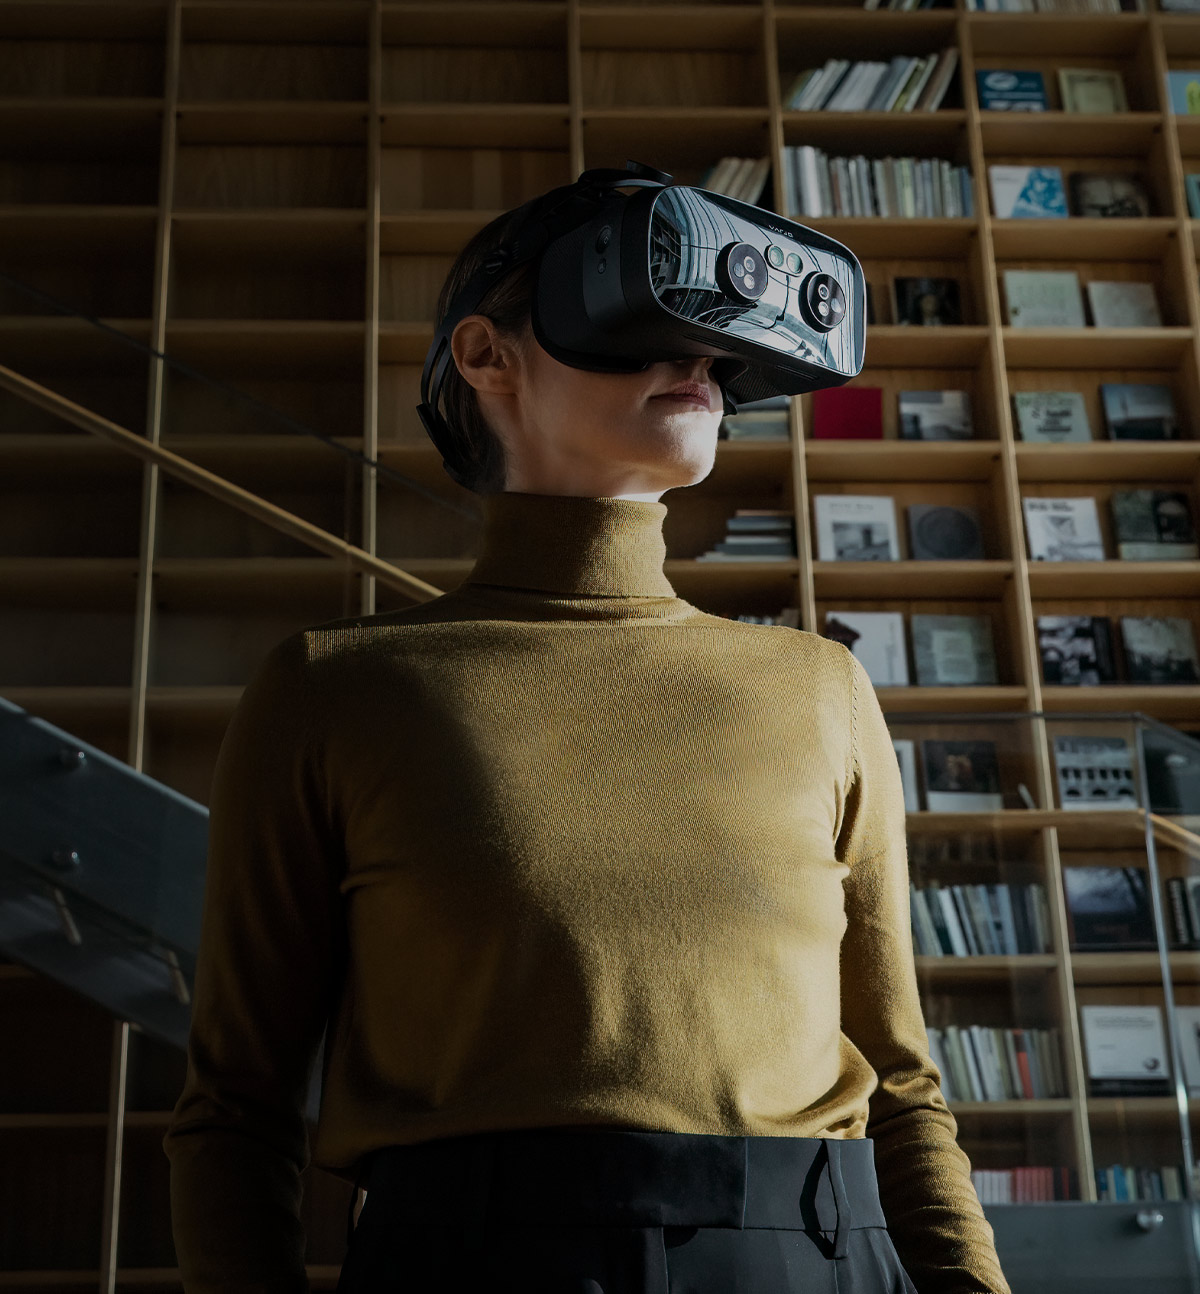 VR for research – Find out how Varjo headsets allow you to conduct high-level academic, clinical and commercial studies in the most immersive XR/AR/VR environments.